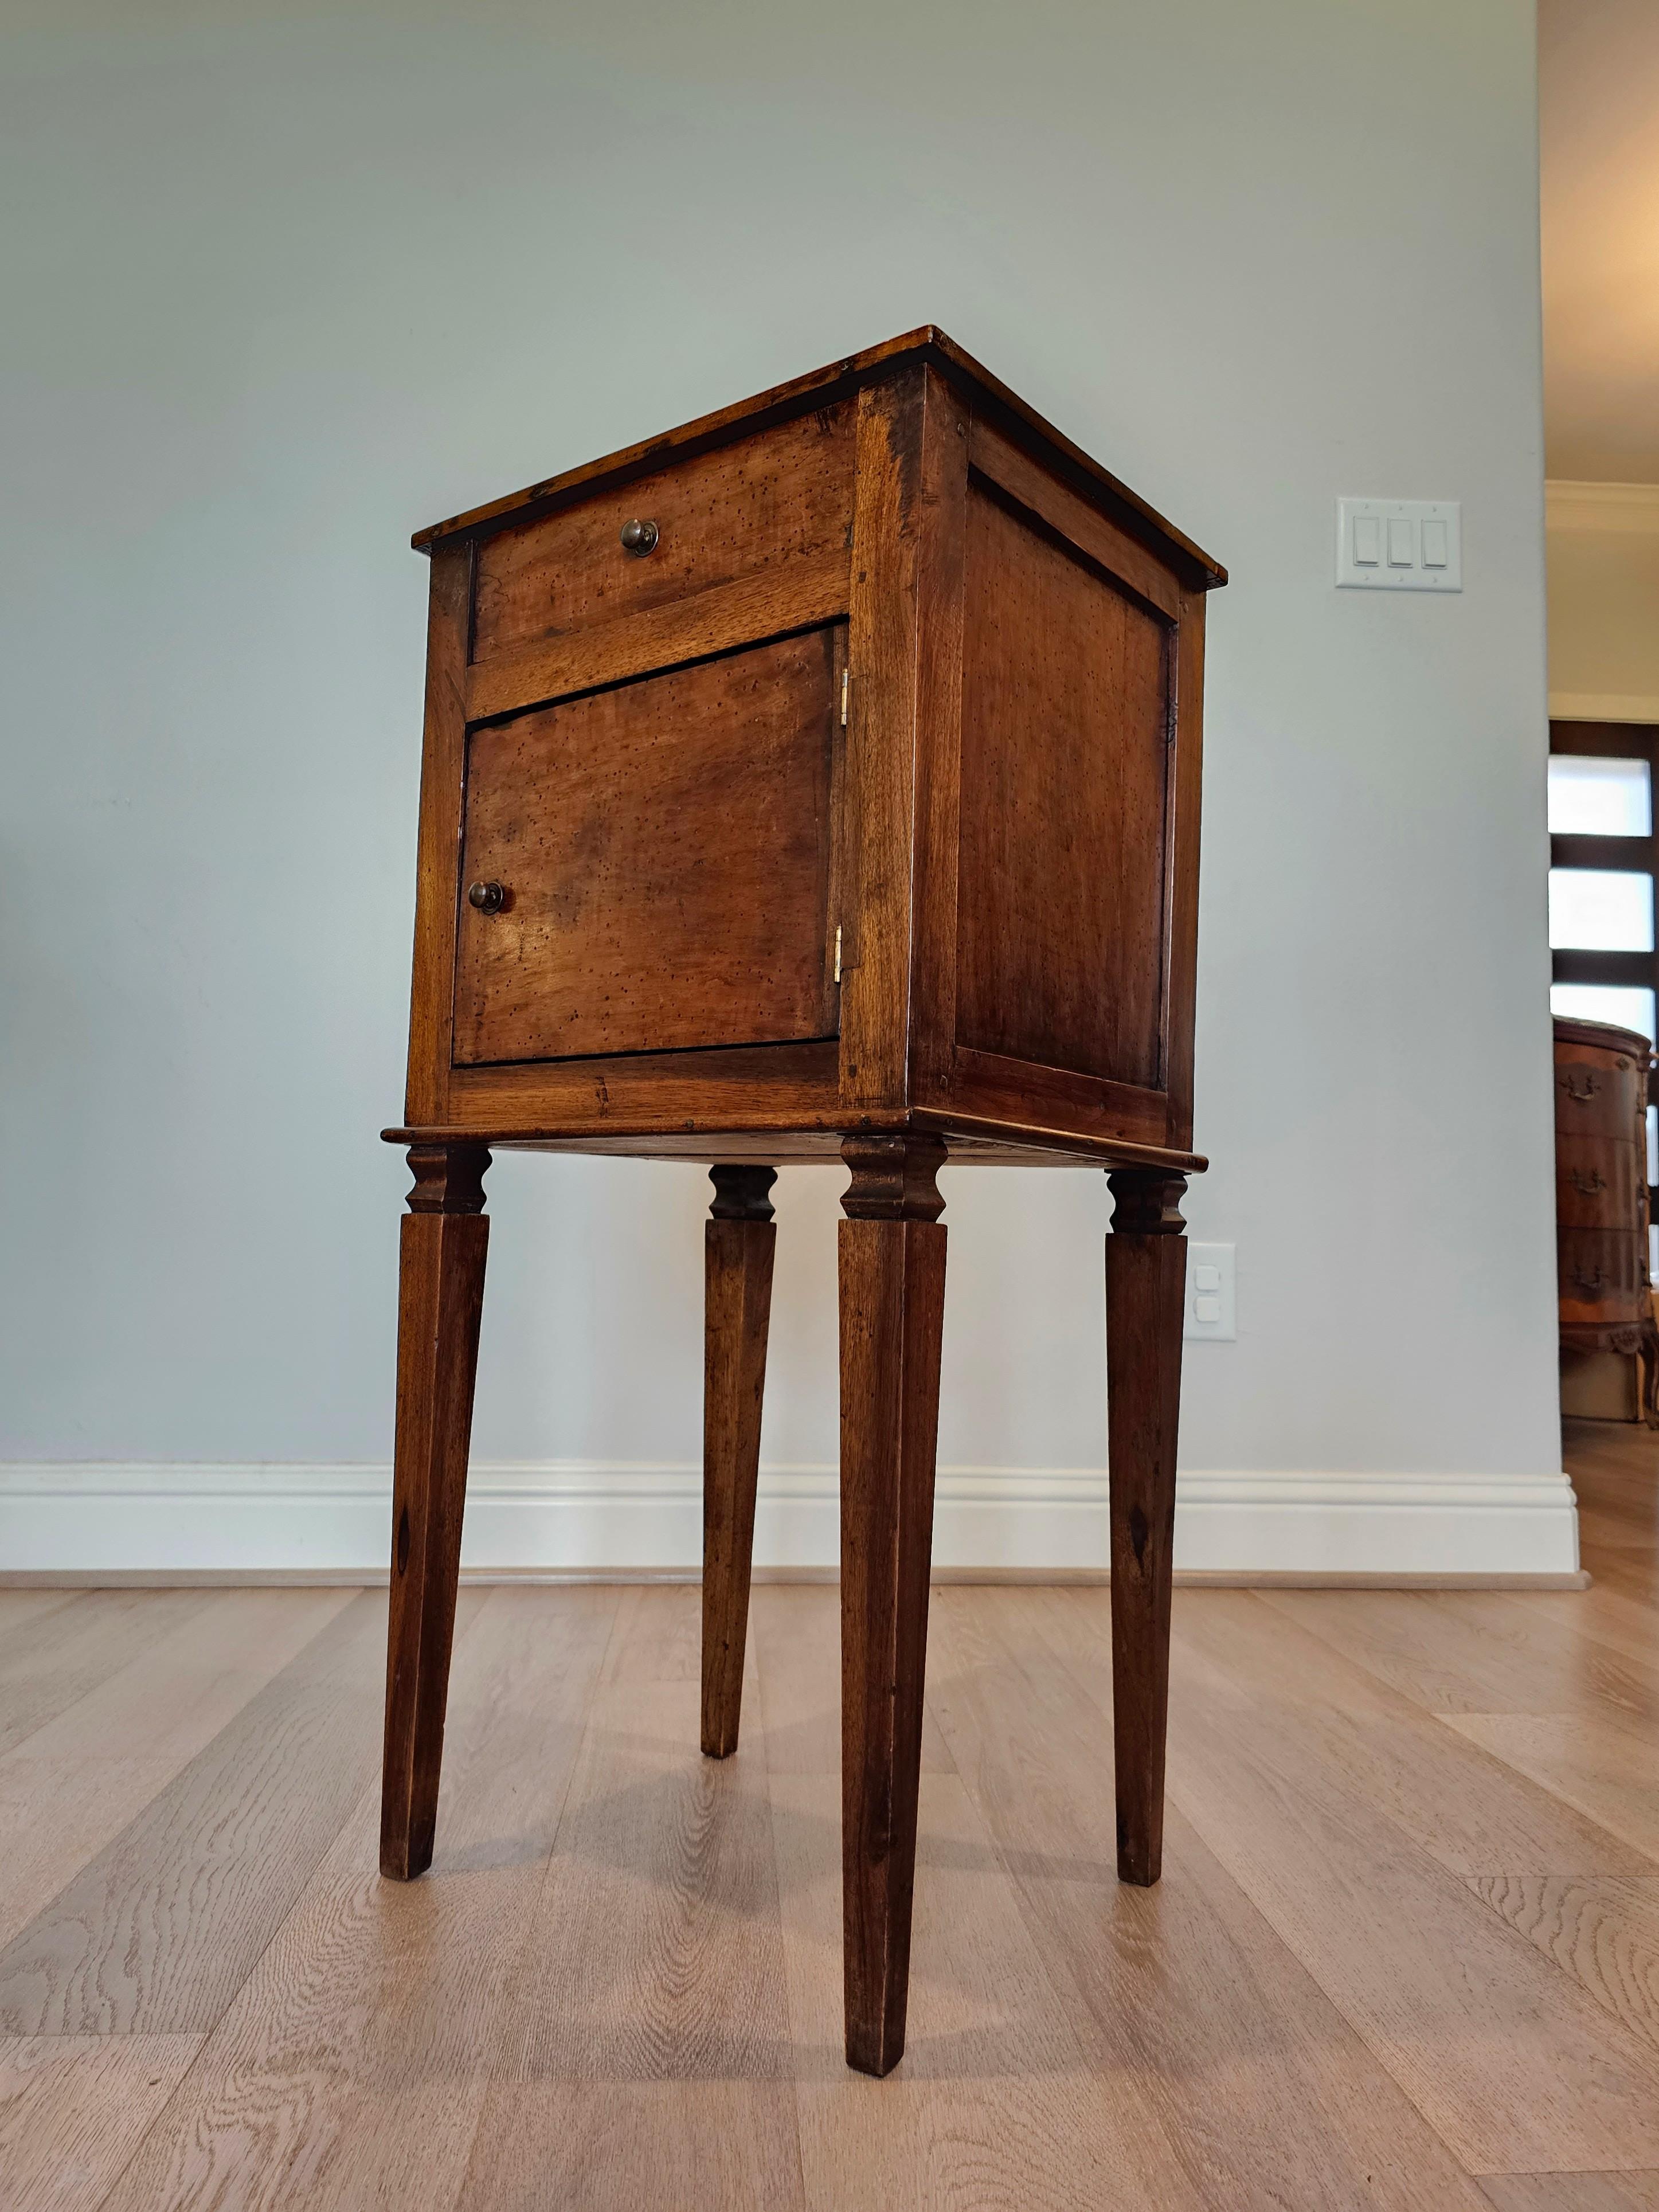 Neoclassical Revival 19th Century Italian Neoclassical Walnut Side Table Bedside Cabinet For Sale